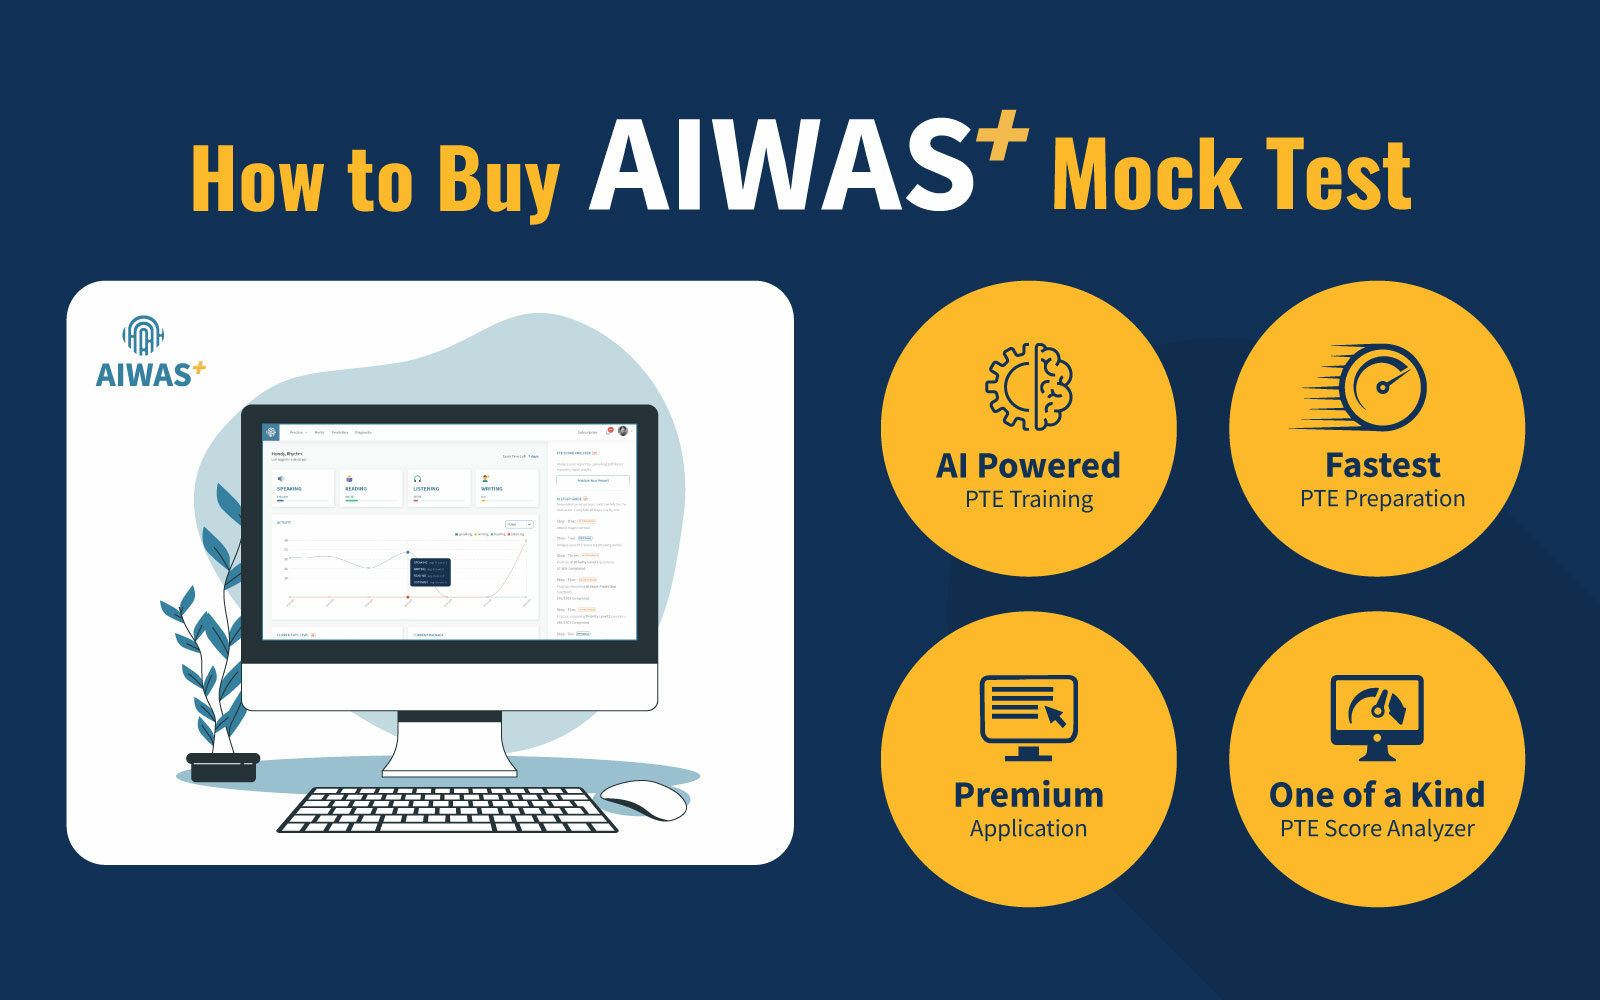 How to Buy AIWAS Plus Mock Test?